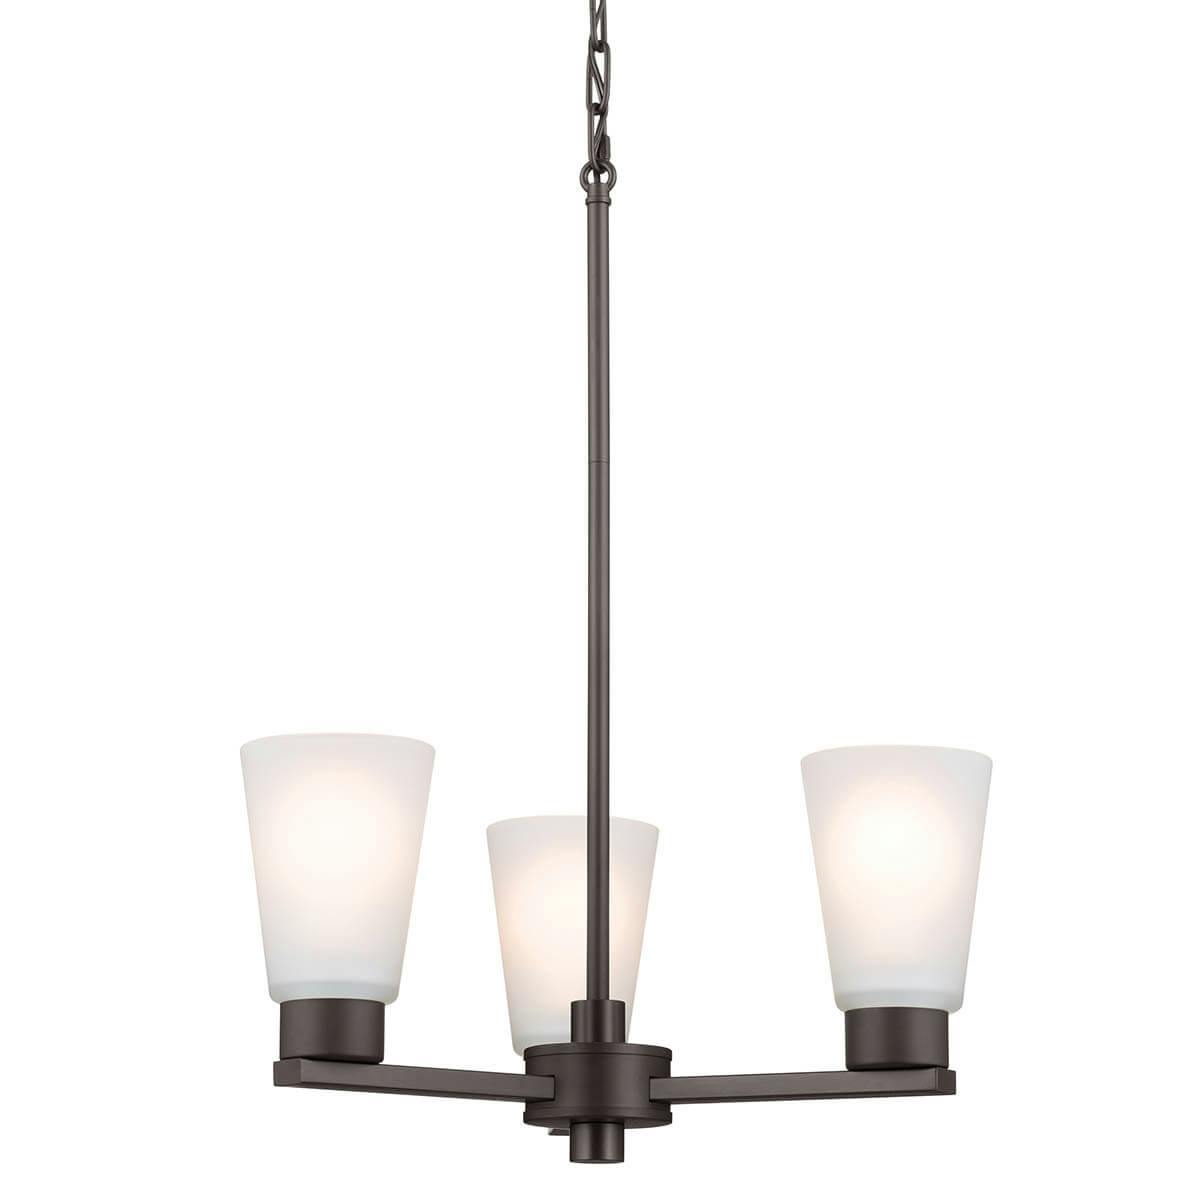 Stamos 18" 3 Light Chandelier Olde Bronze without the canopy on a white background